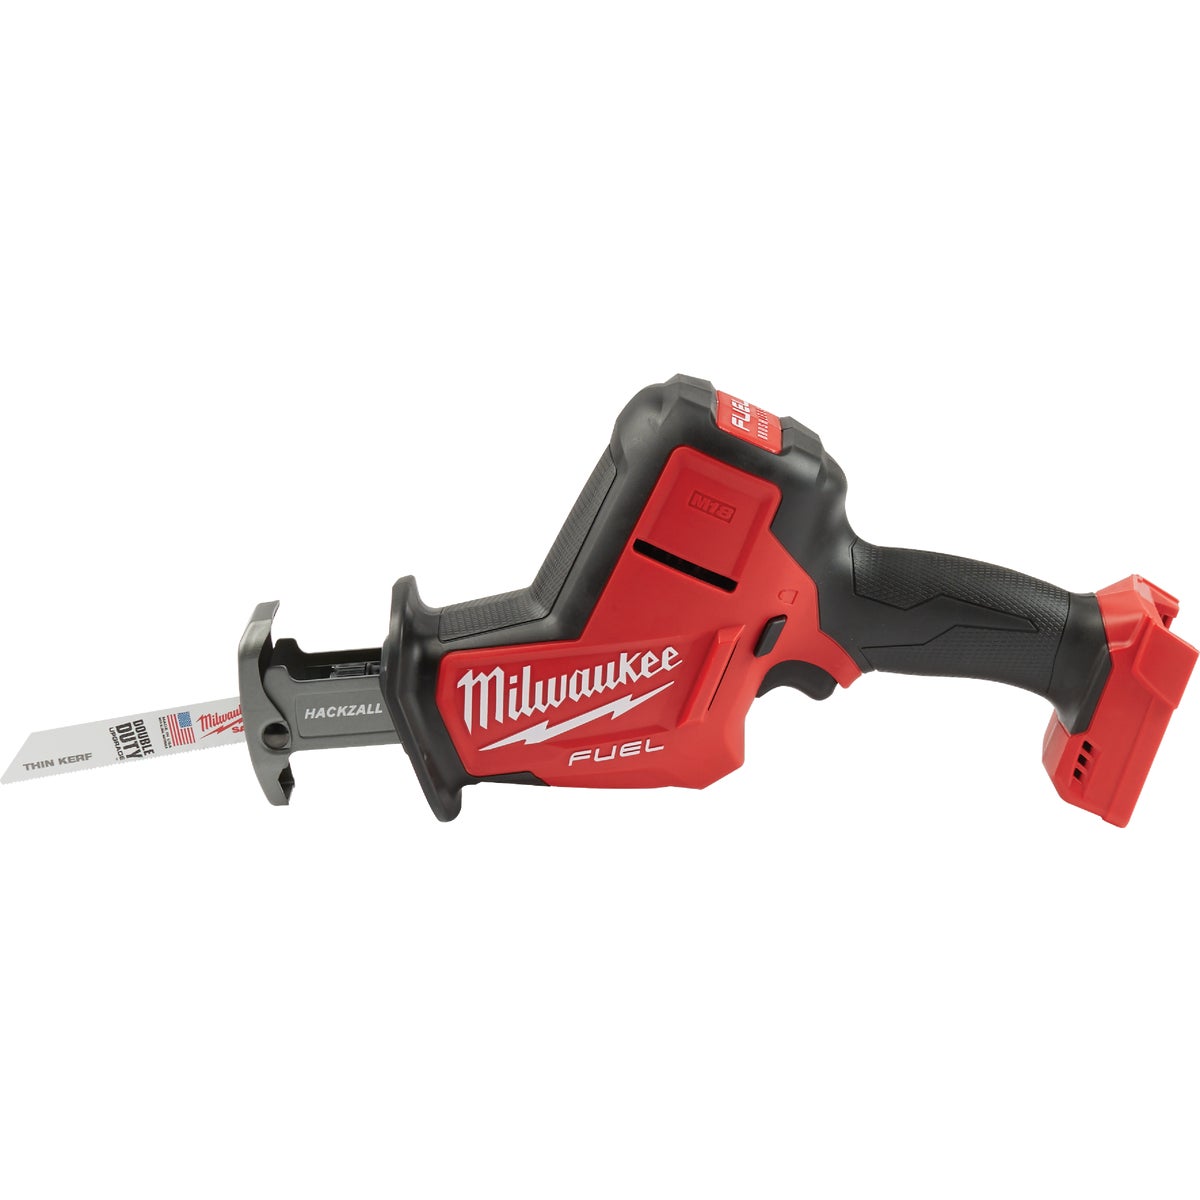 Milwaukee HACKZALL M18 FUEL 18-Volt Lithium-Ion Brushless Cordless Reciprocating Saw (Tool Only)